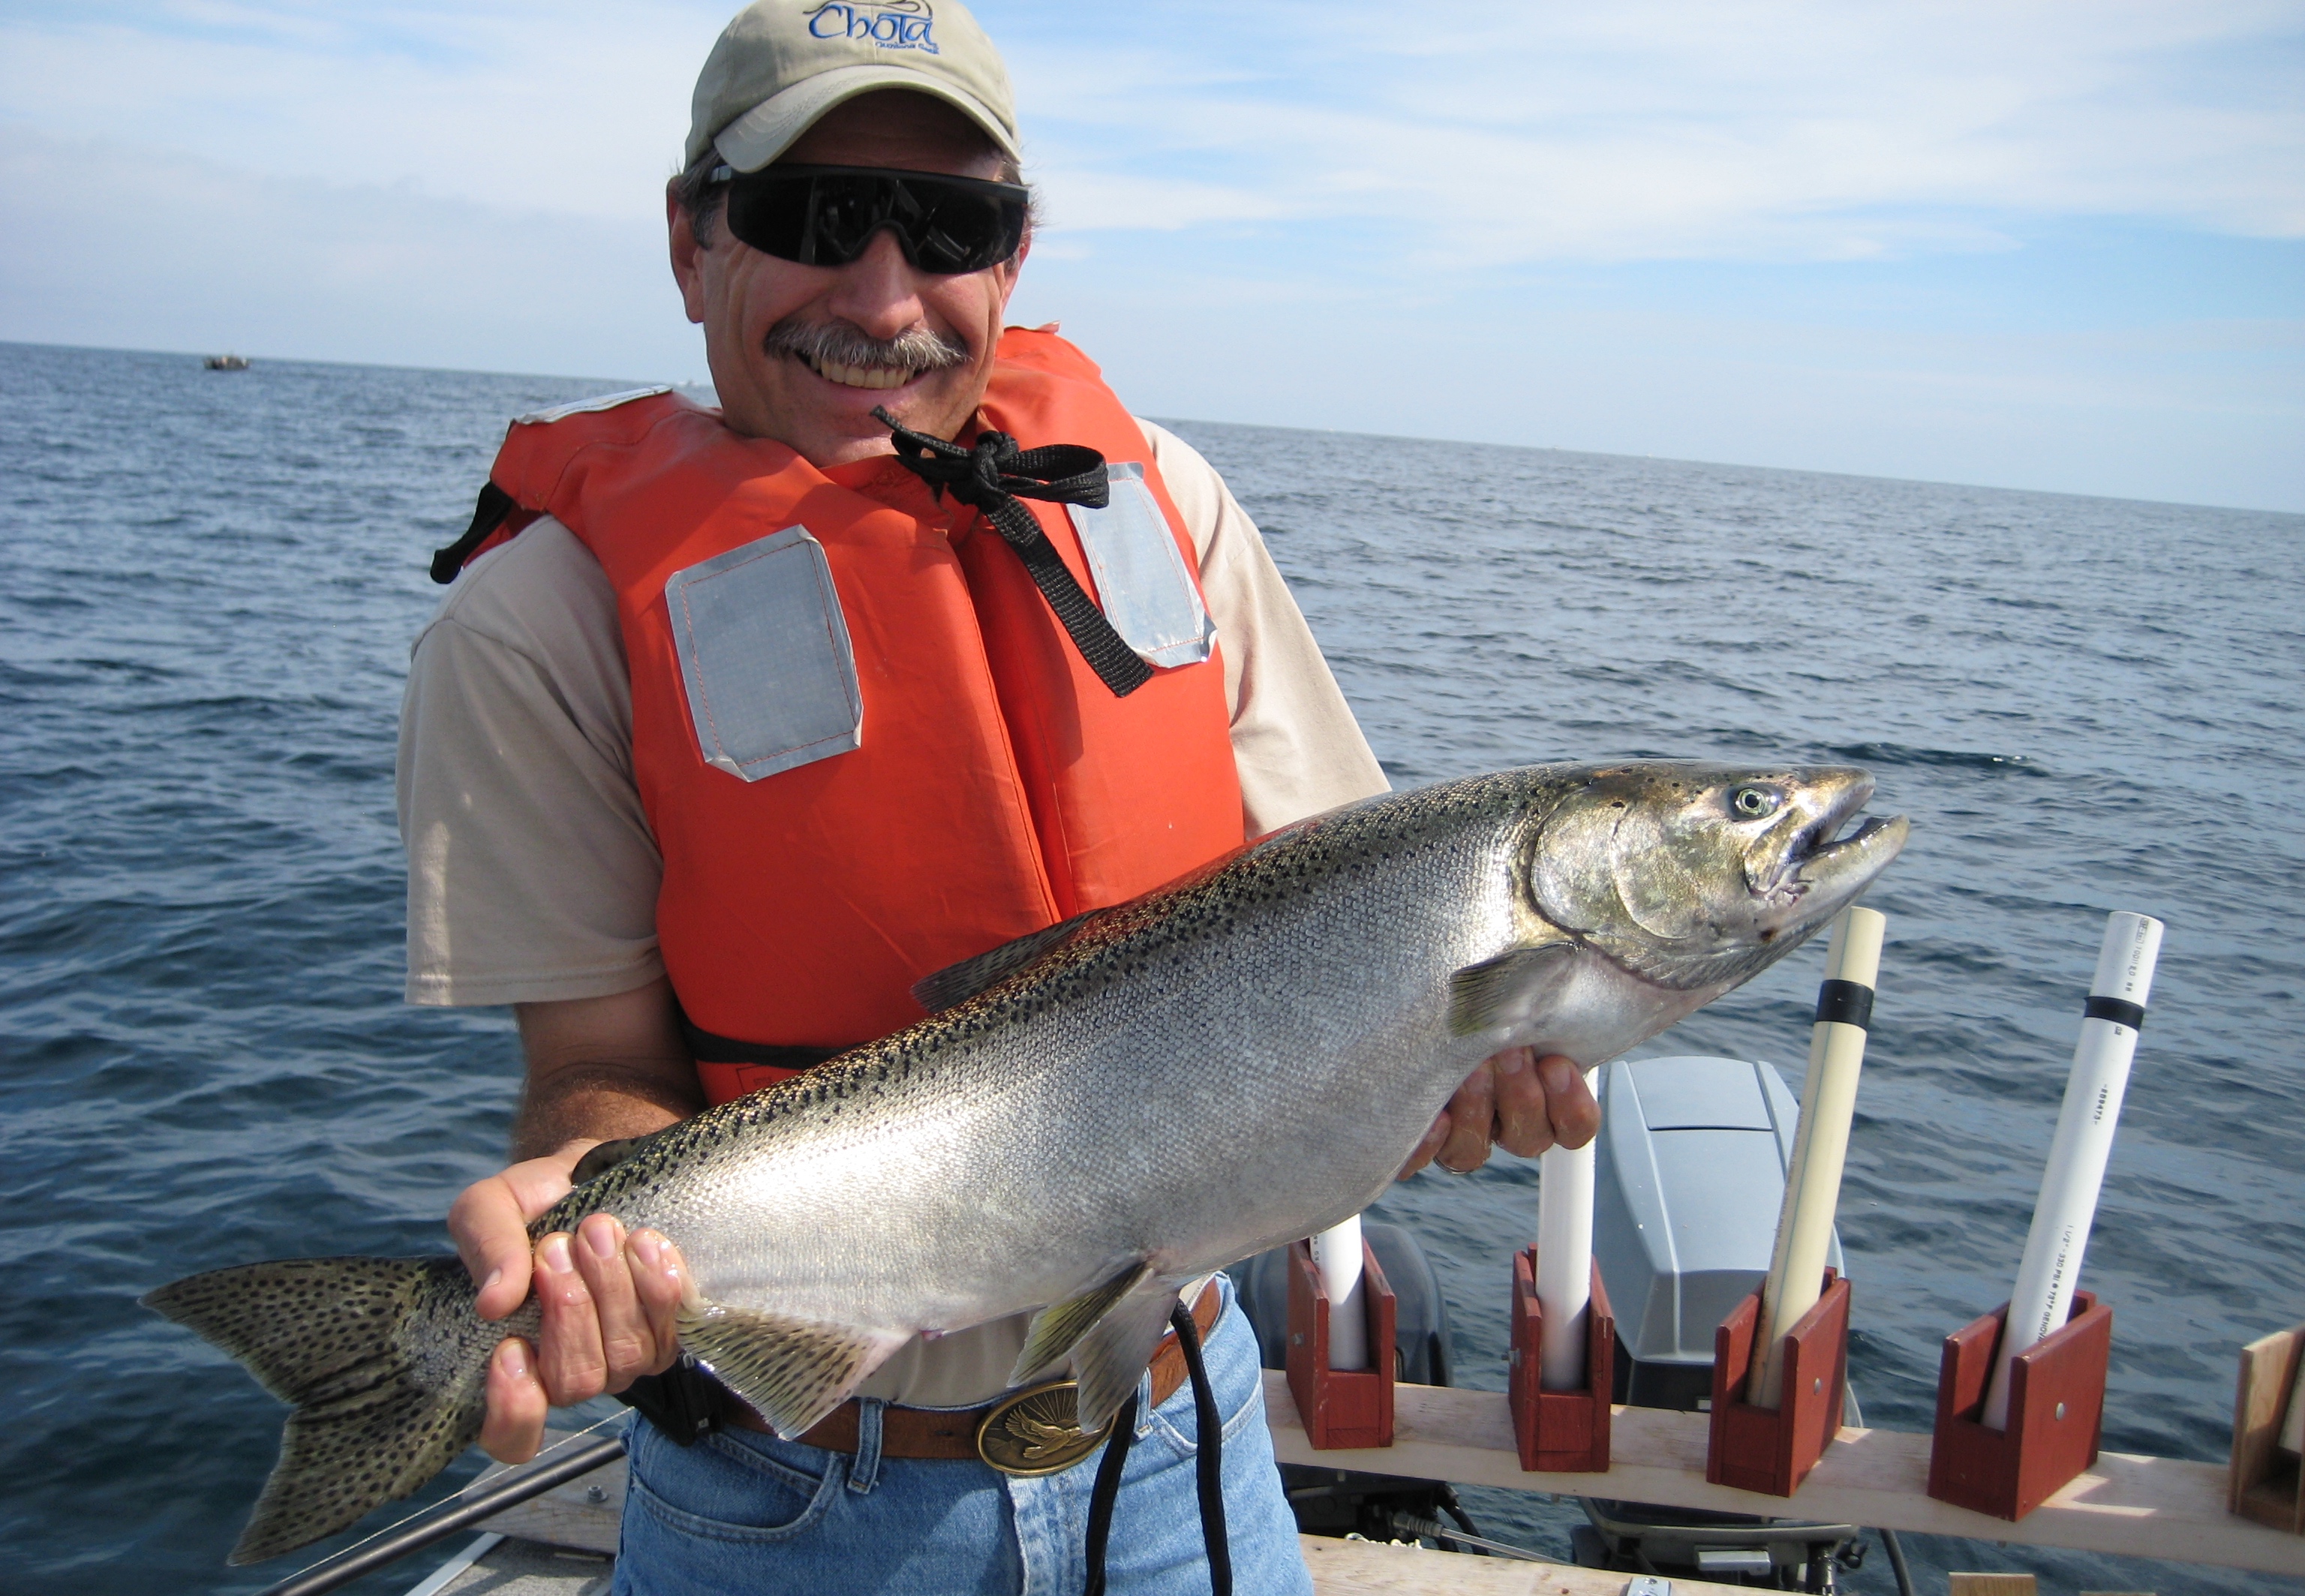 Chinook salmon are non-native to Michigan, but bring benefits to the state.